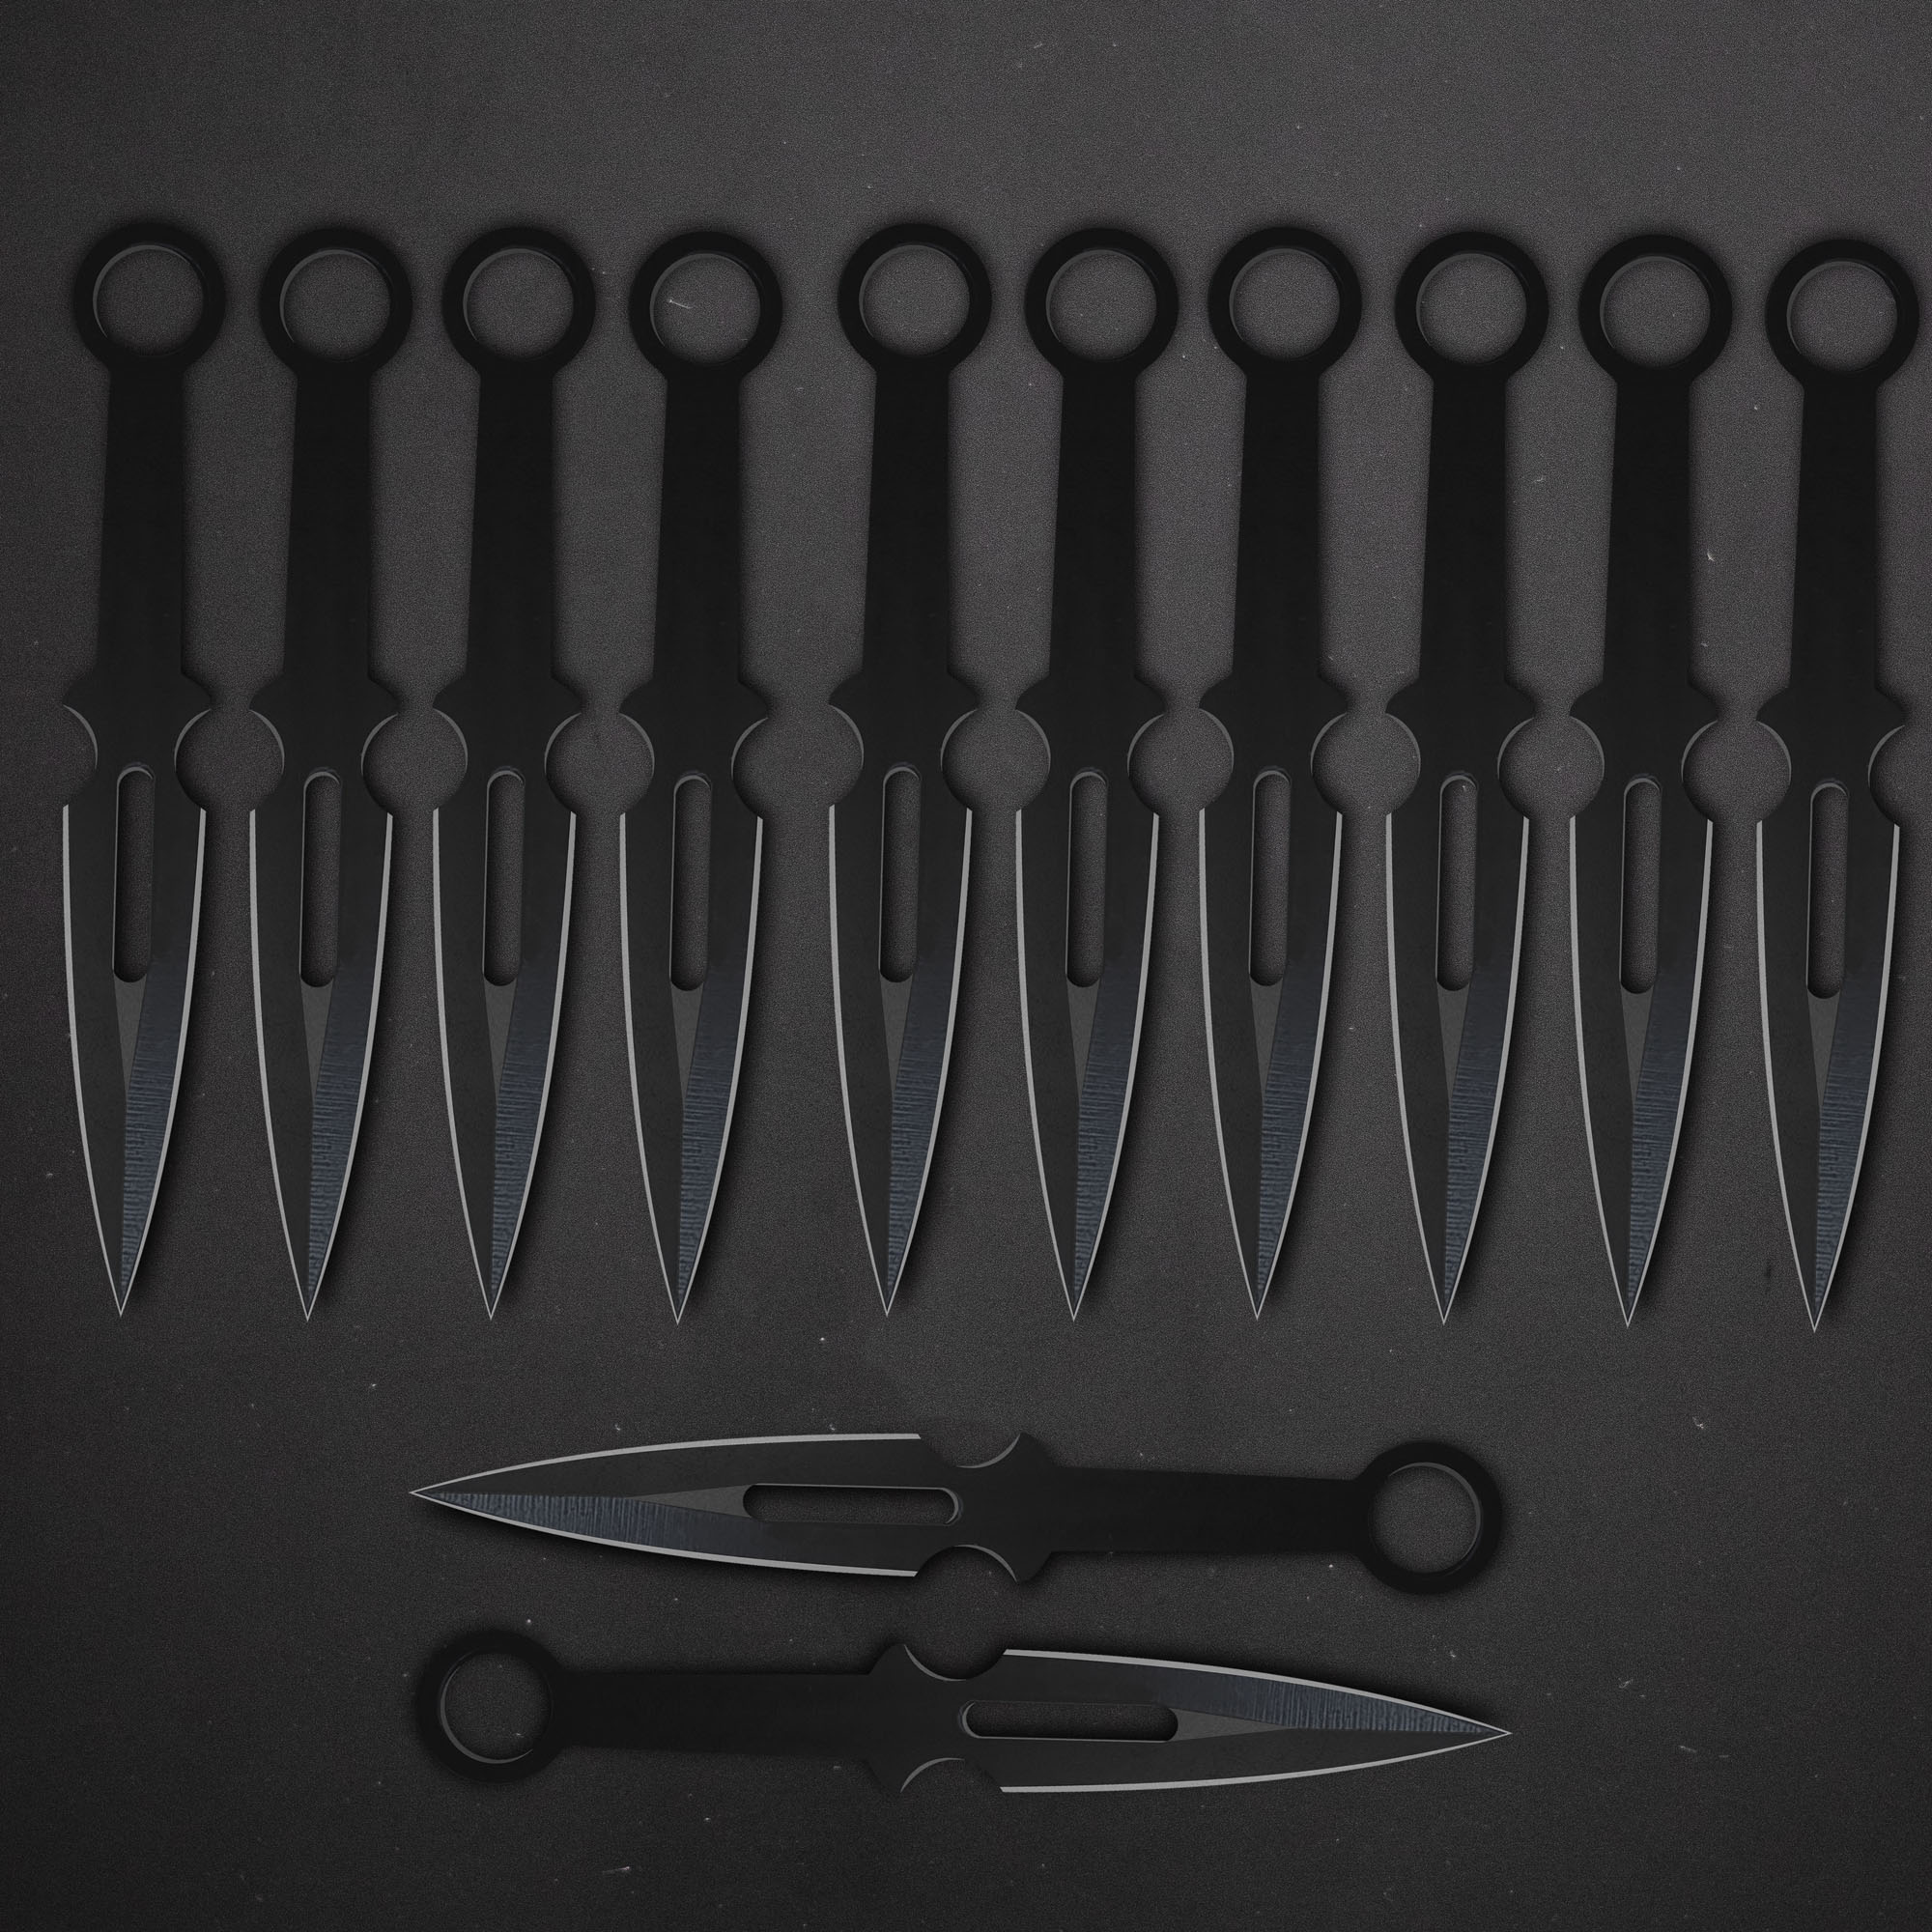 12 black throwing knives with target